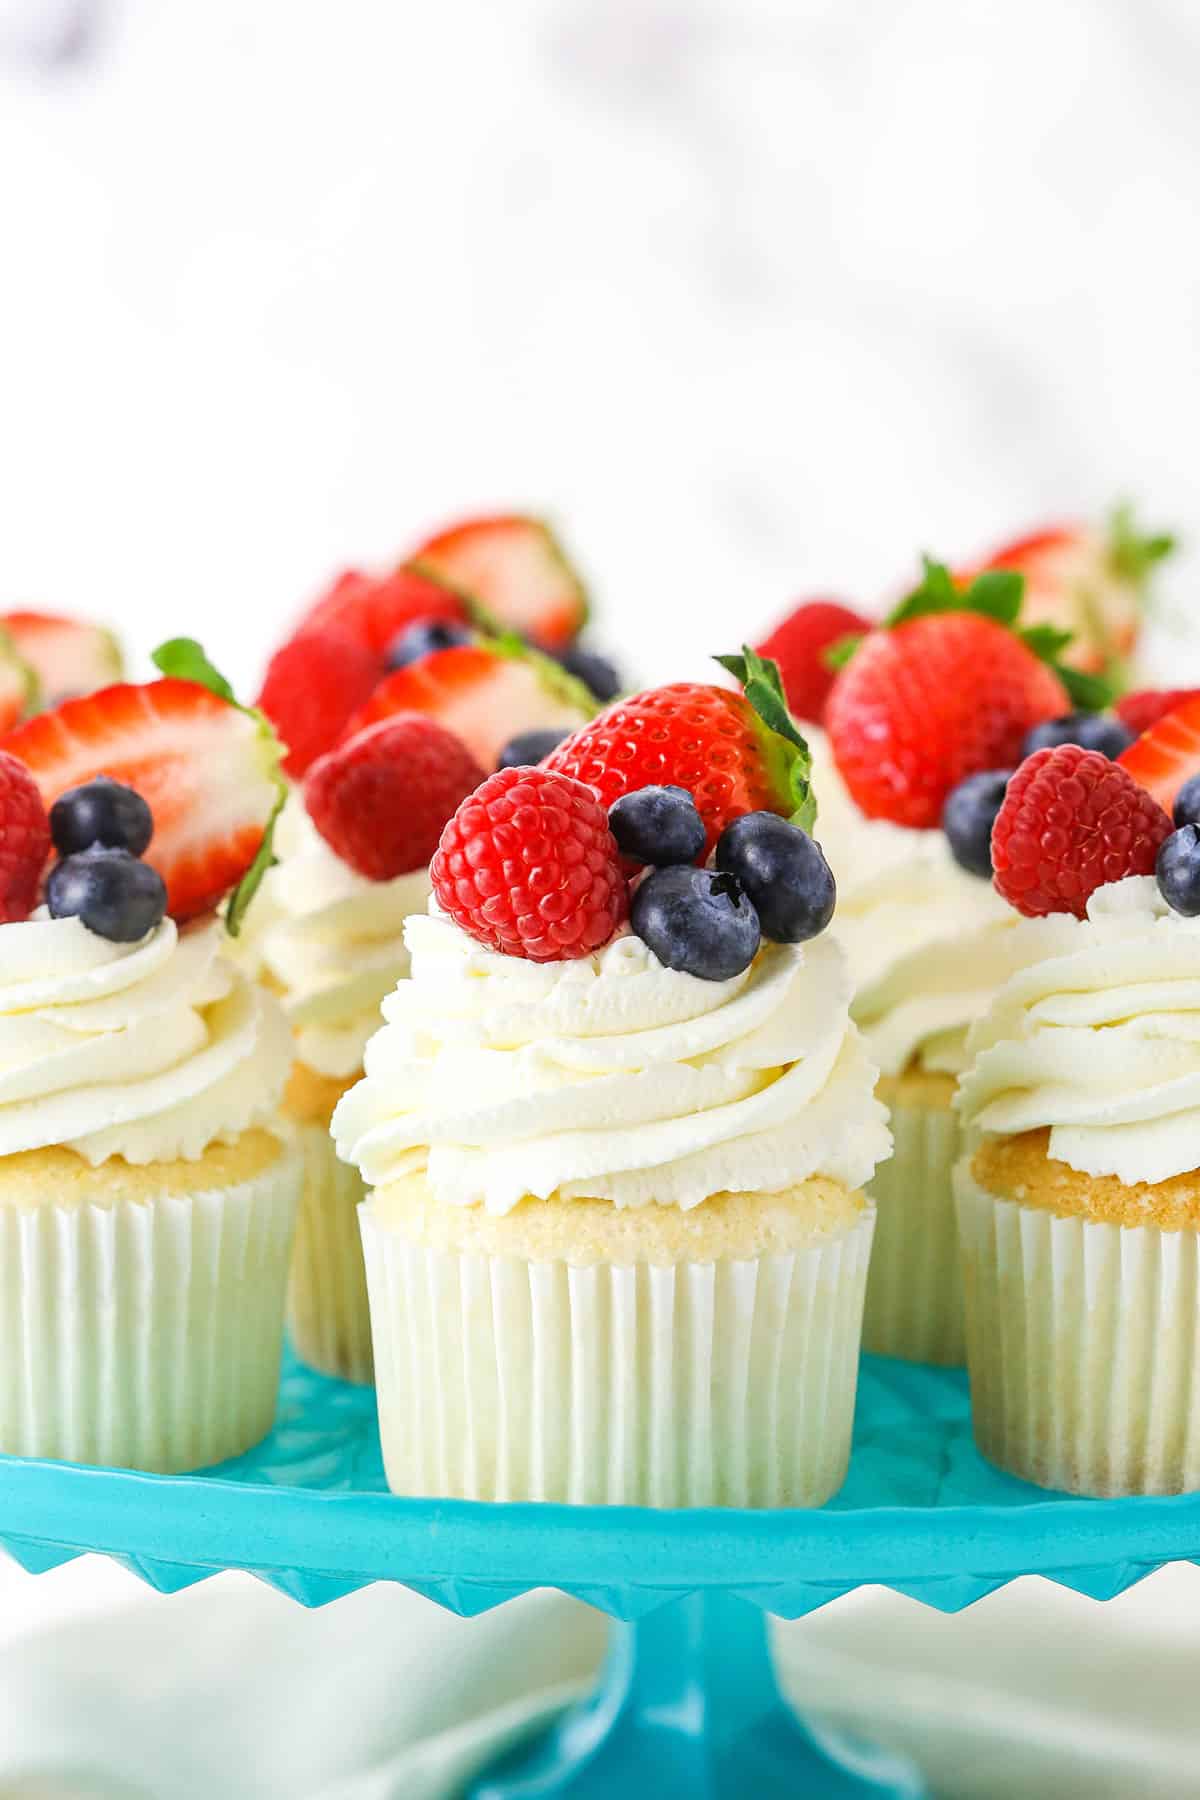 Fluffy Angel Food Cupcakes with Whipped Cream Frosting & Fresh Berries